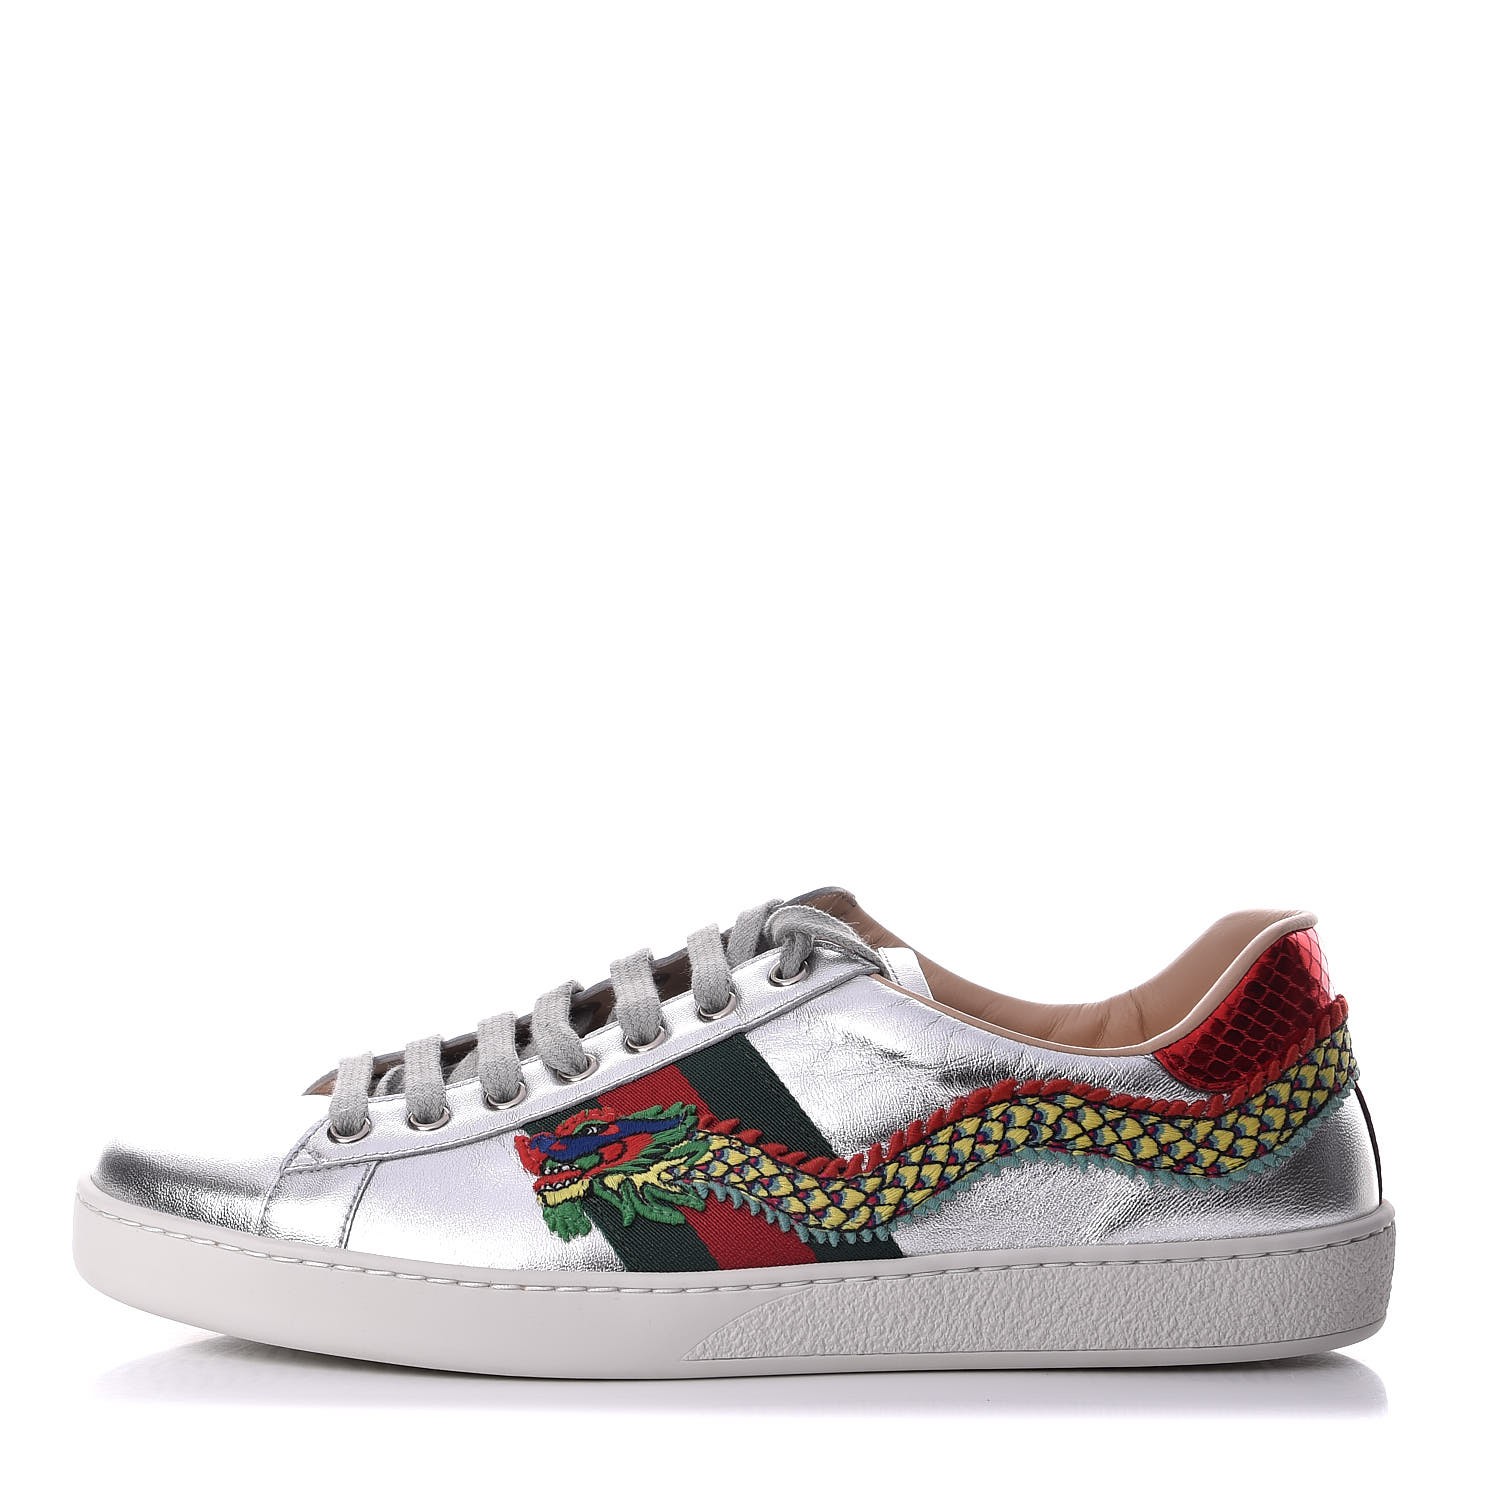 gucci ace sneakers dragon